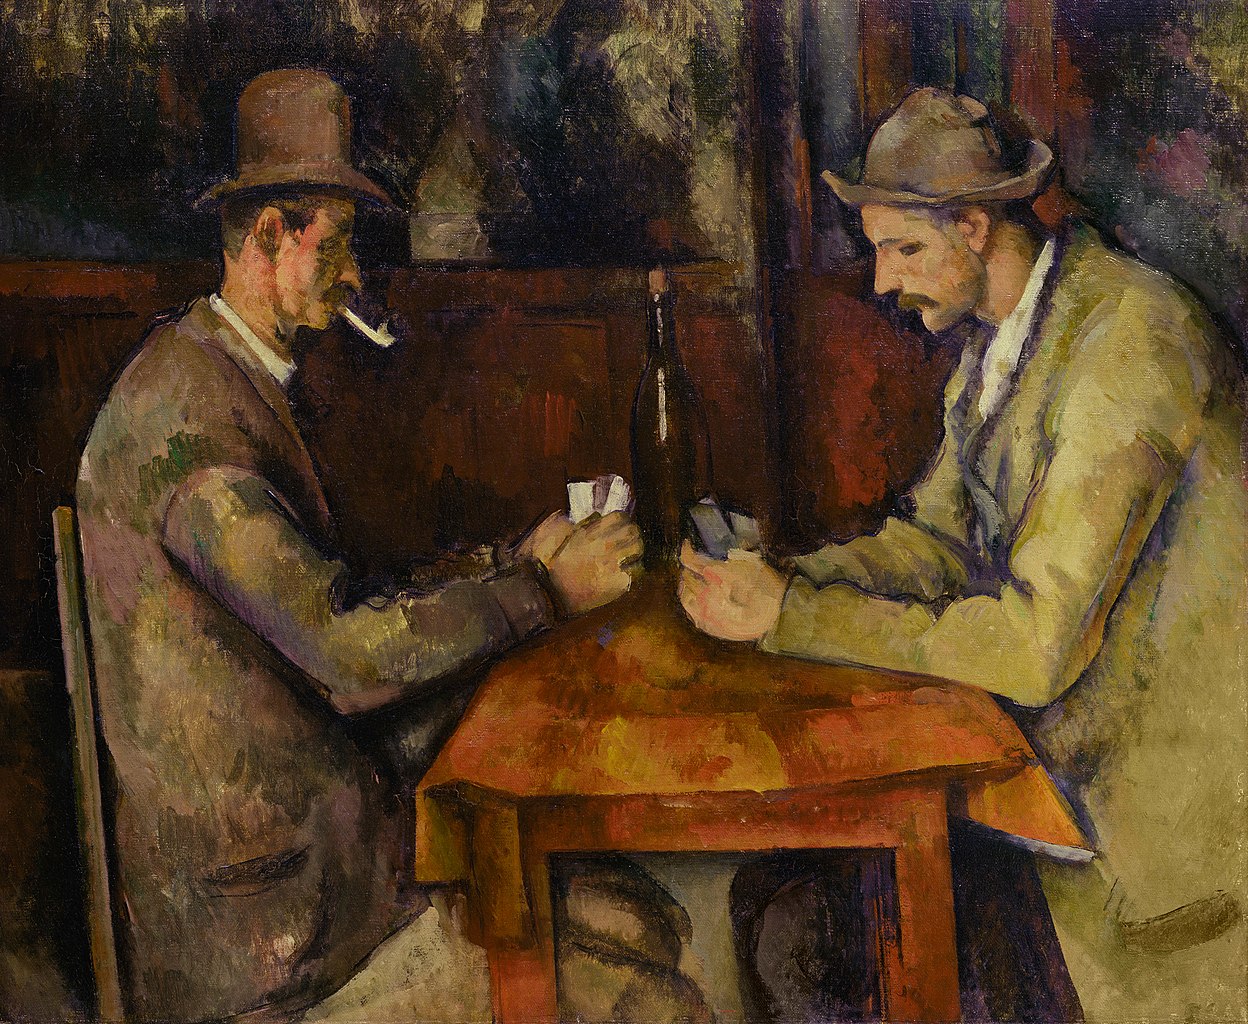 Card Players (5th version) (ca.1894-1895) by Paul Cezanne, oil on canvas, Musée d'Orsay